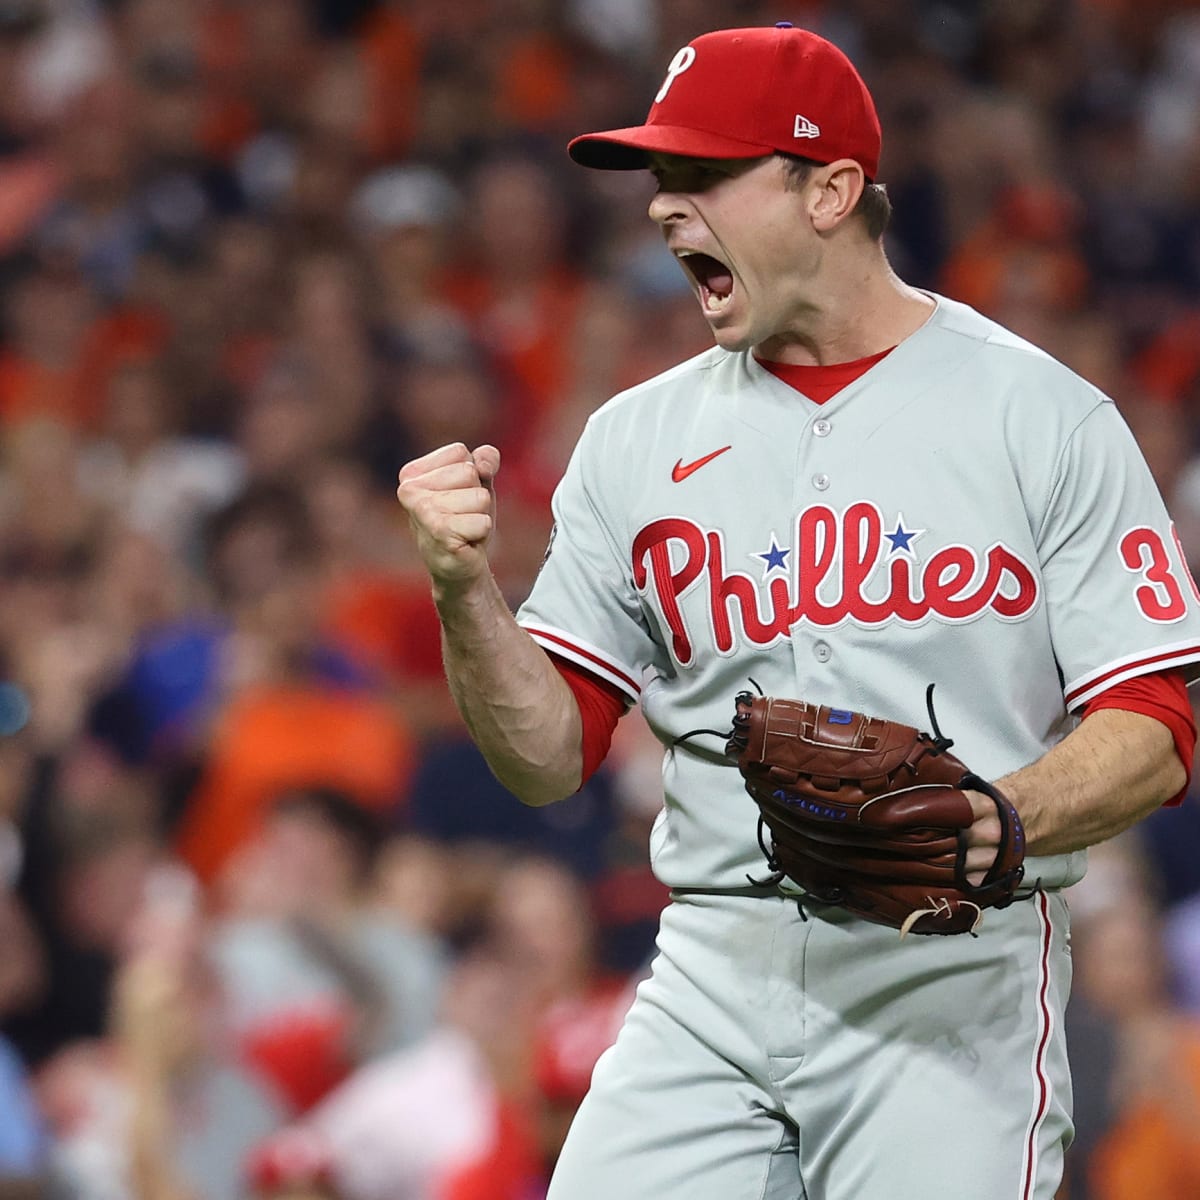 Phillies bullpen moves lead to World Series game win vs. Astros